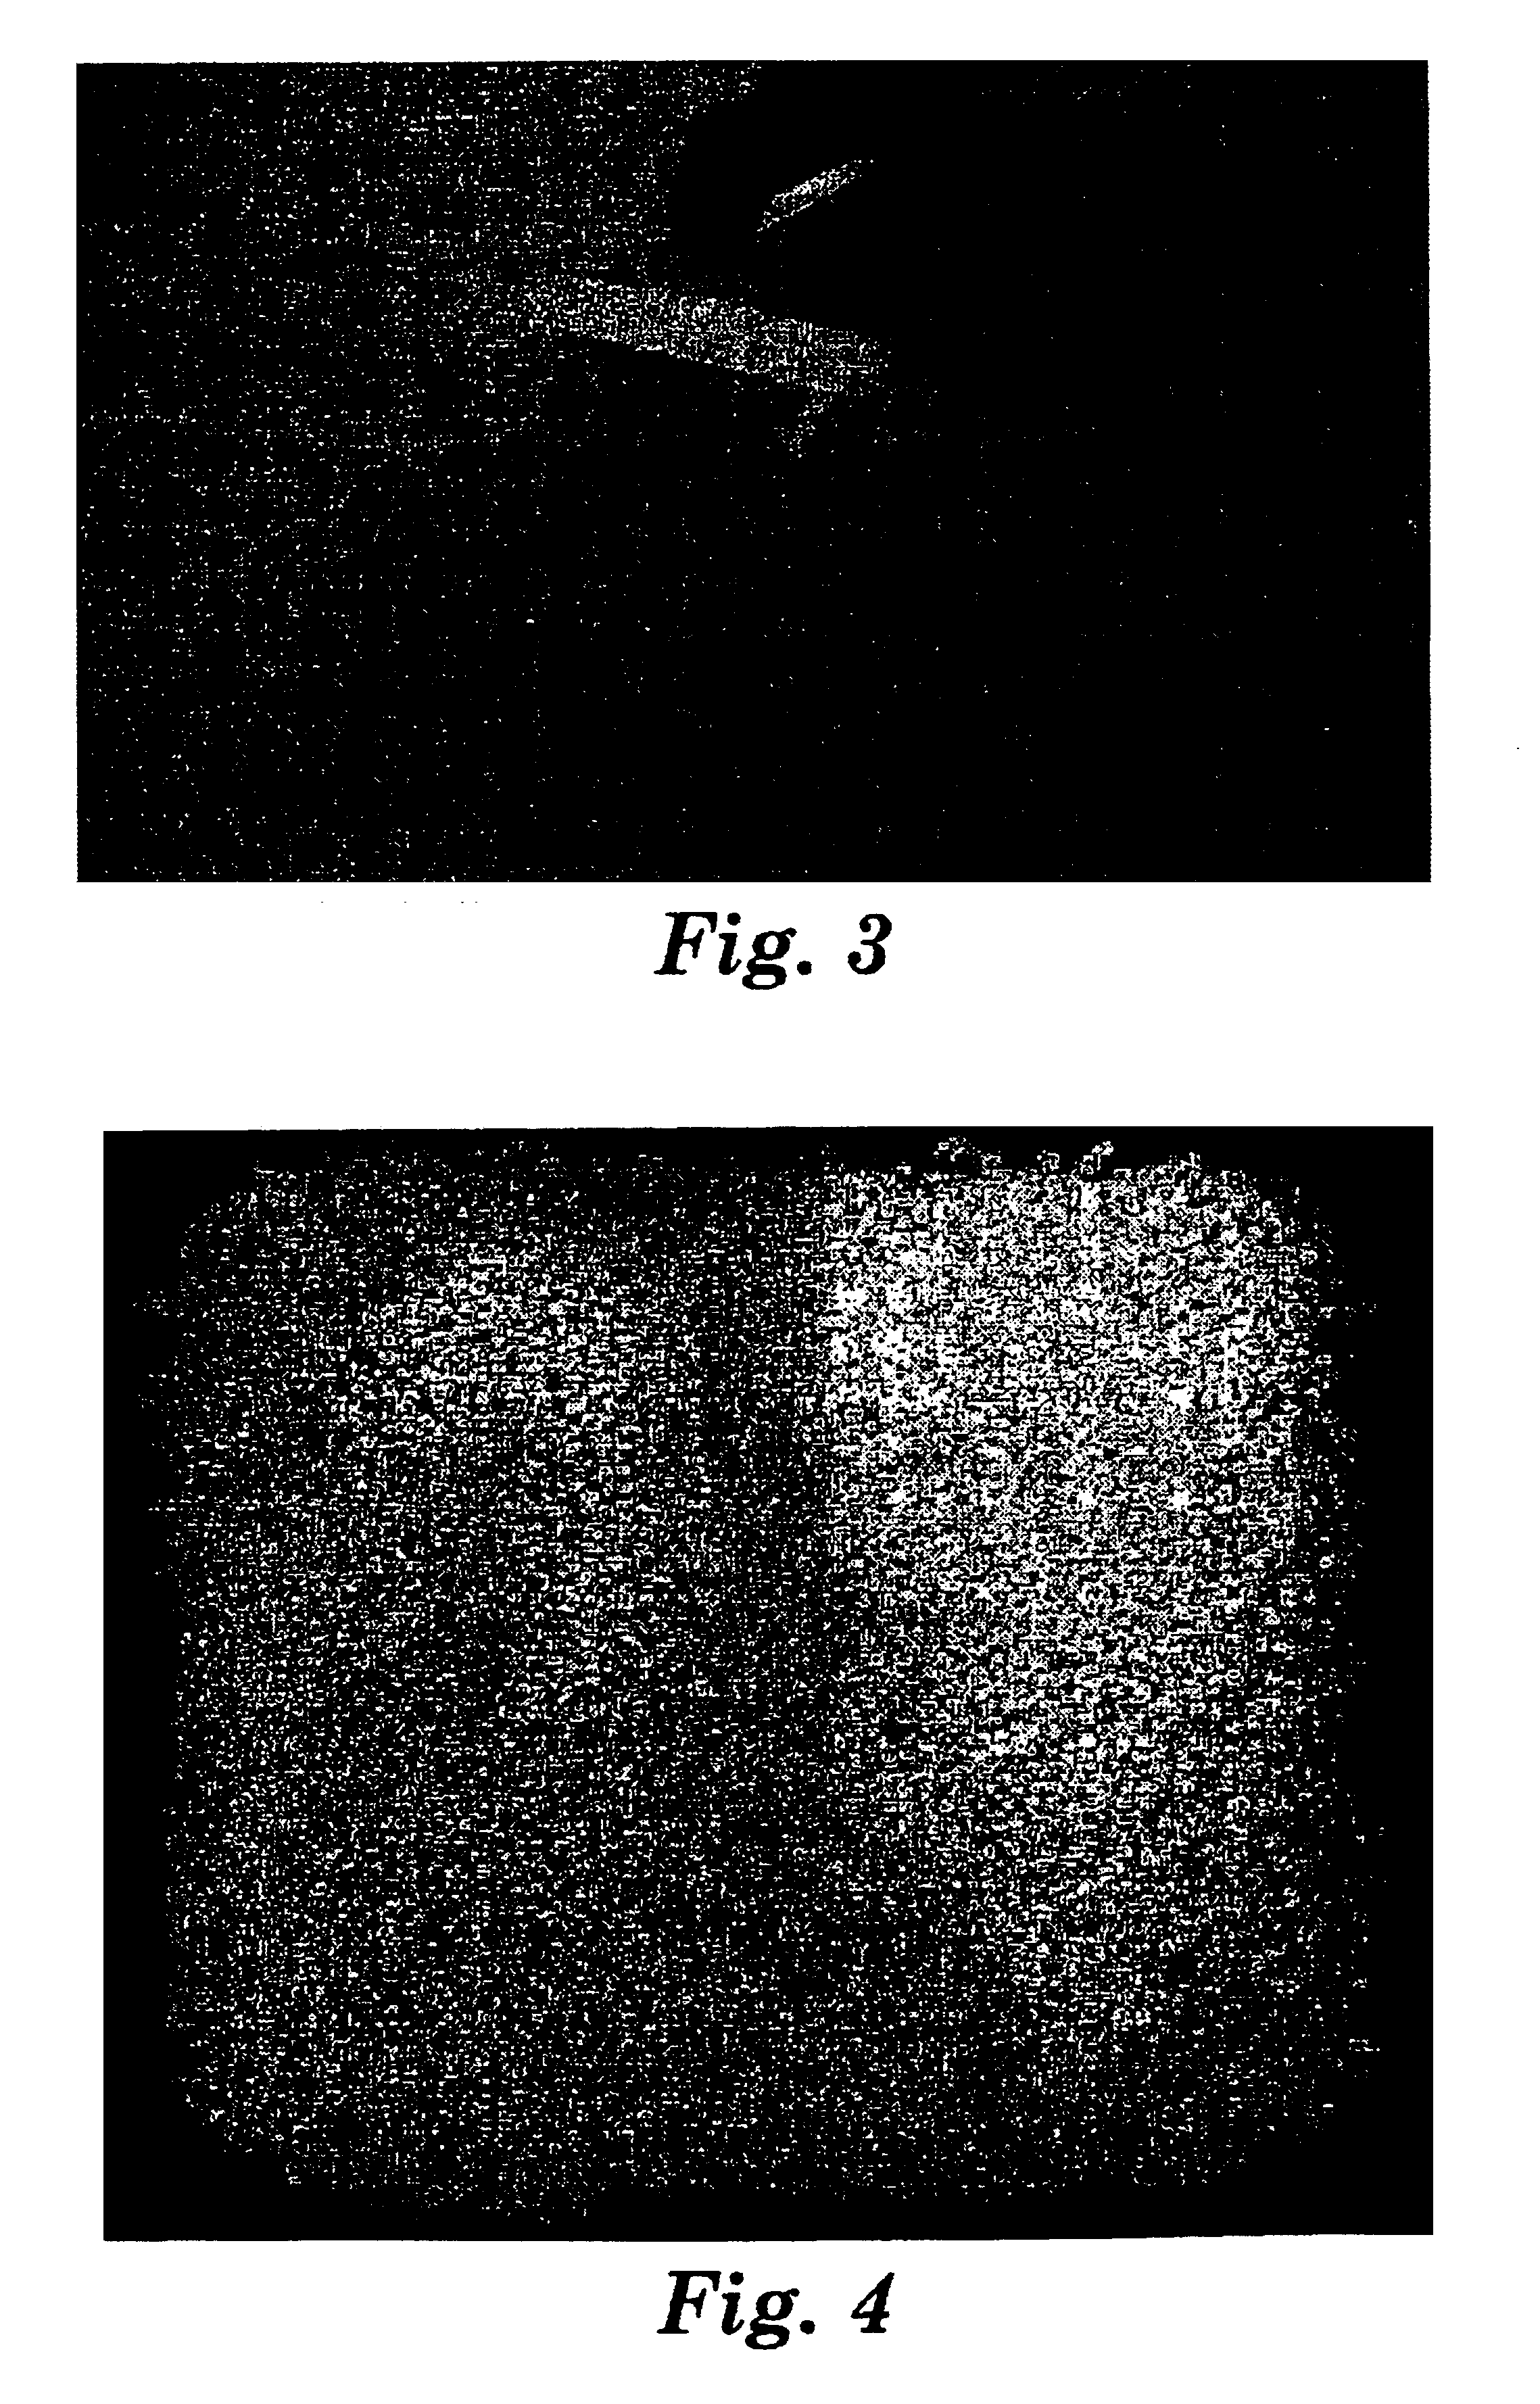 Method of detecting wear on a substrate using a fluorescent indicator